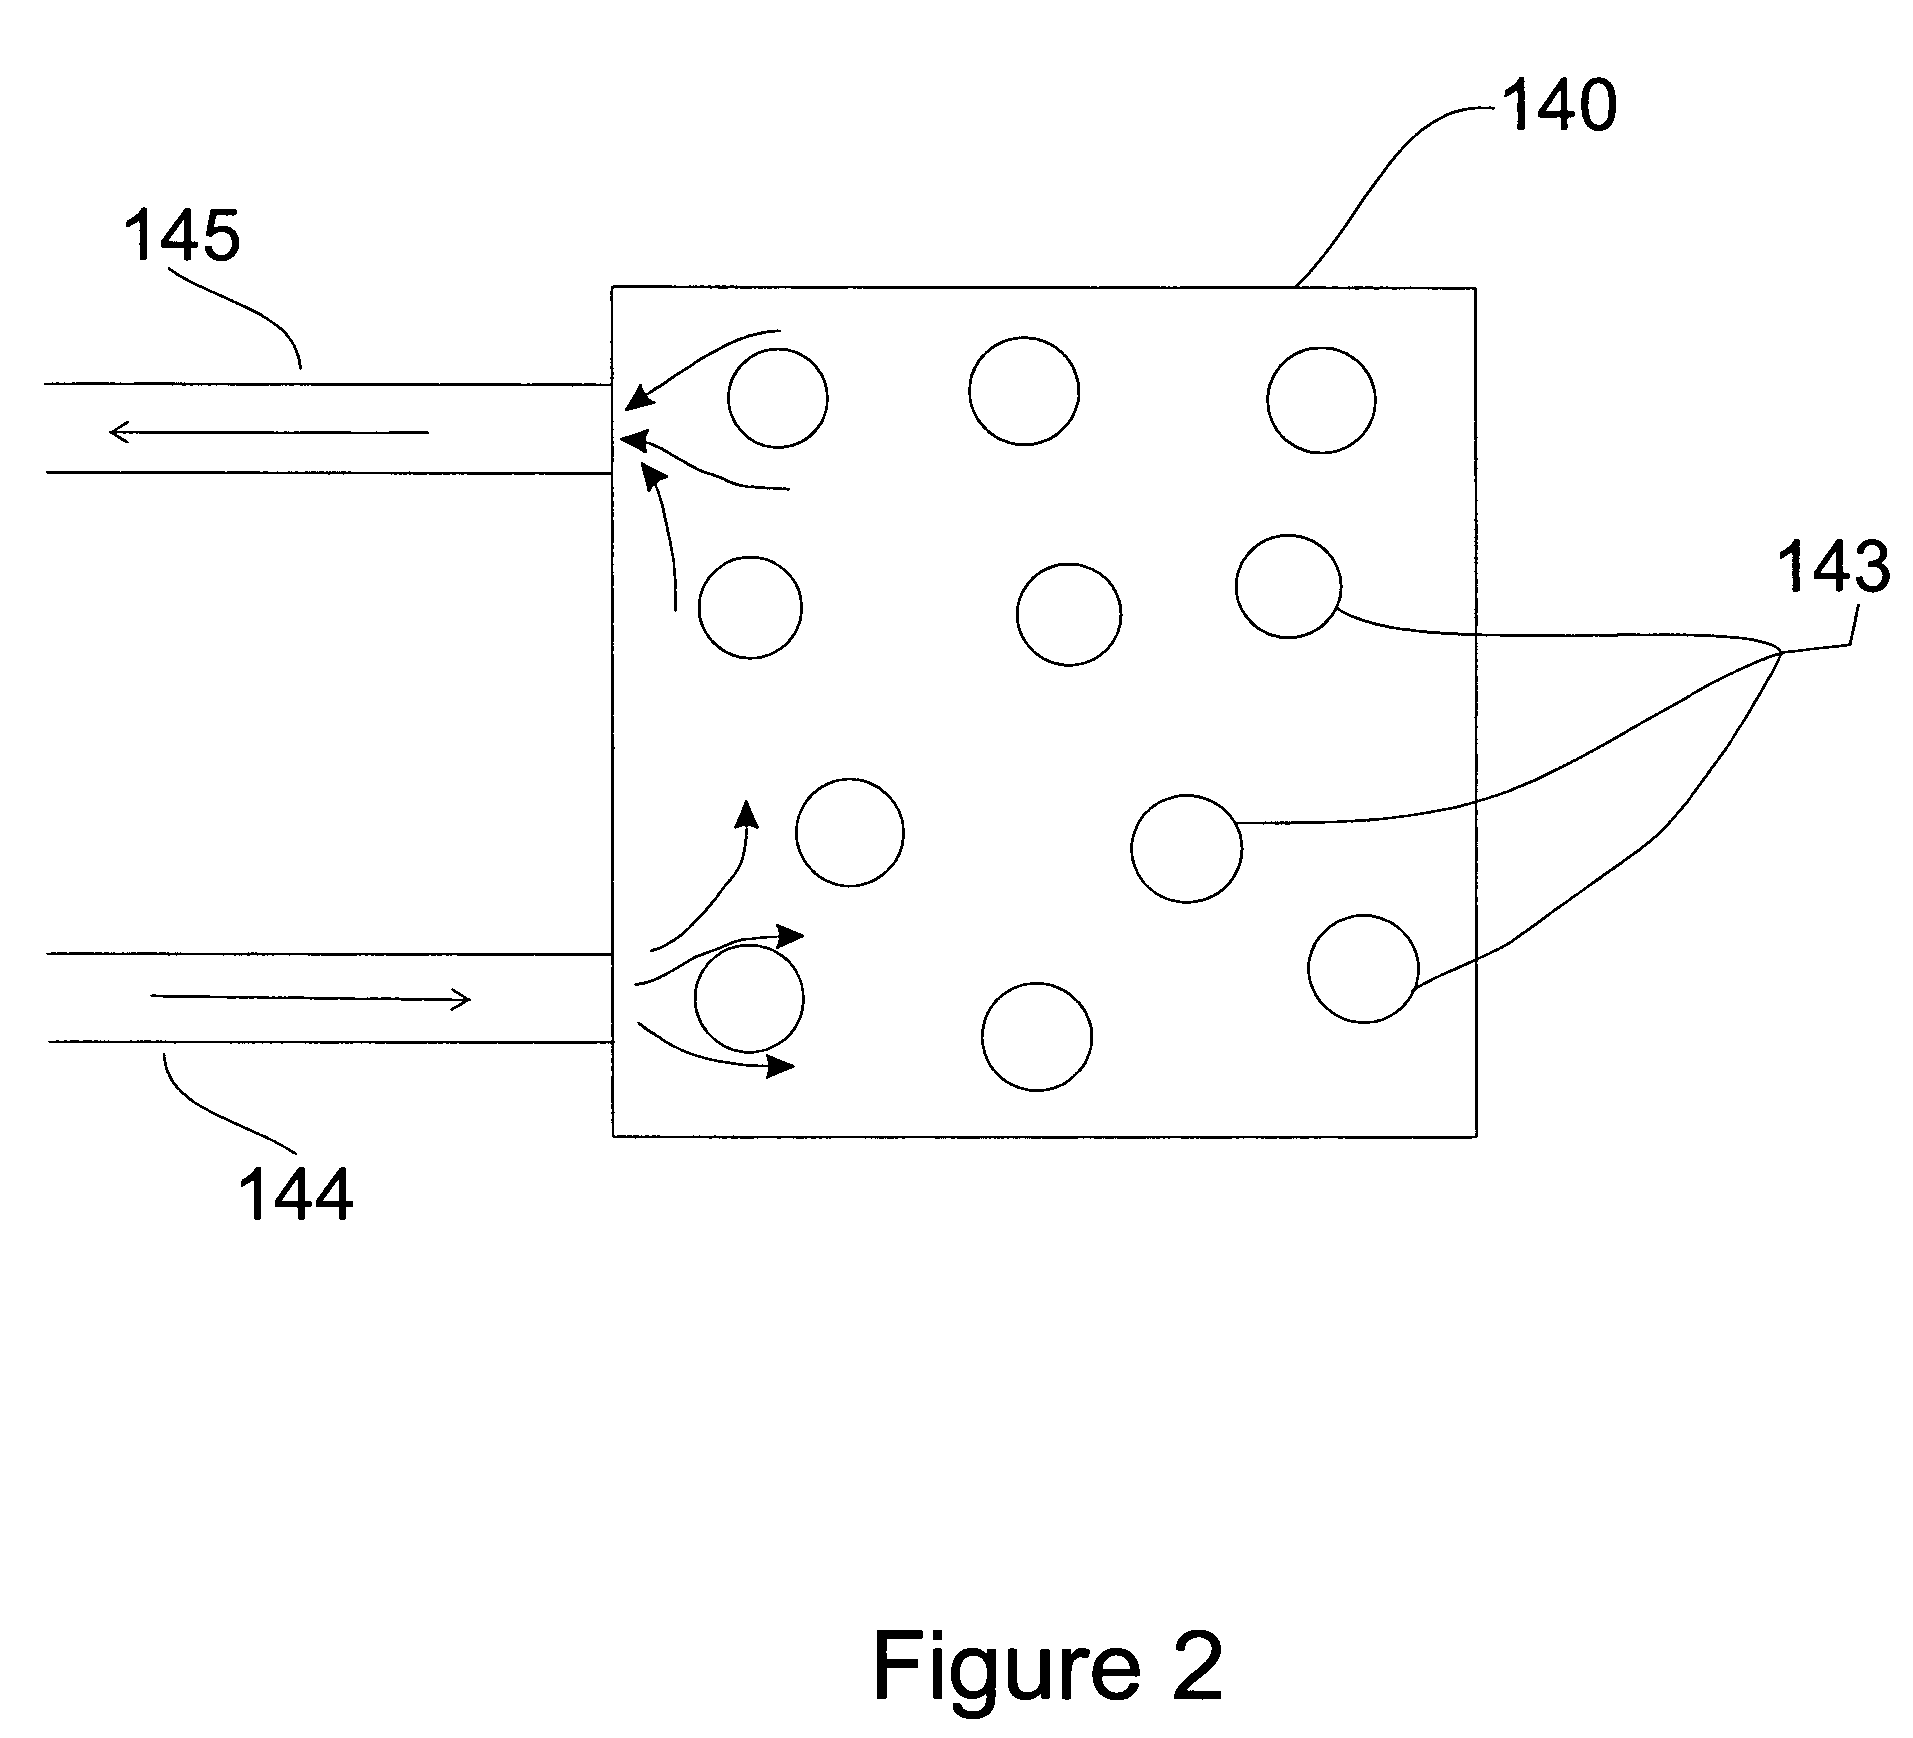 Patterned thermal treatment using patterned cryogen spray and irradiation by light